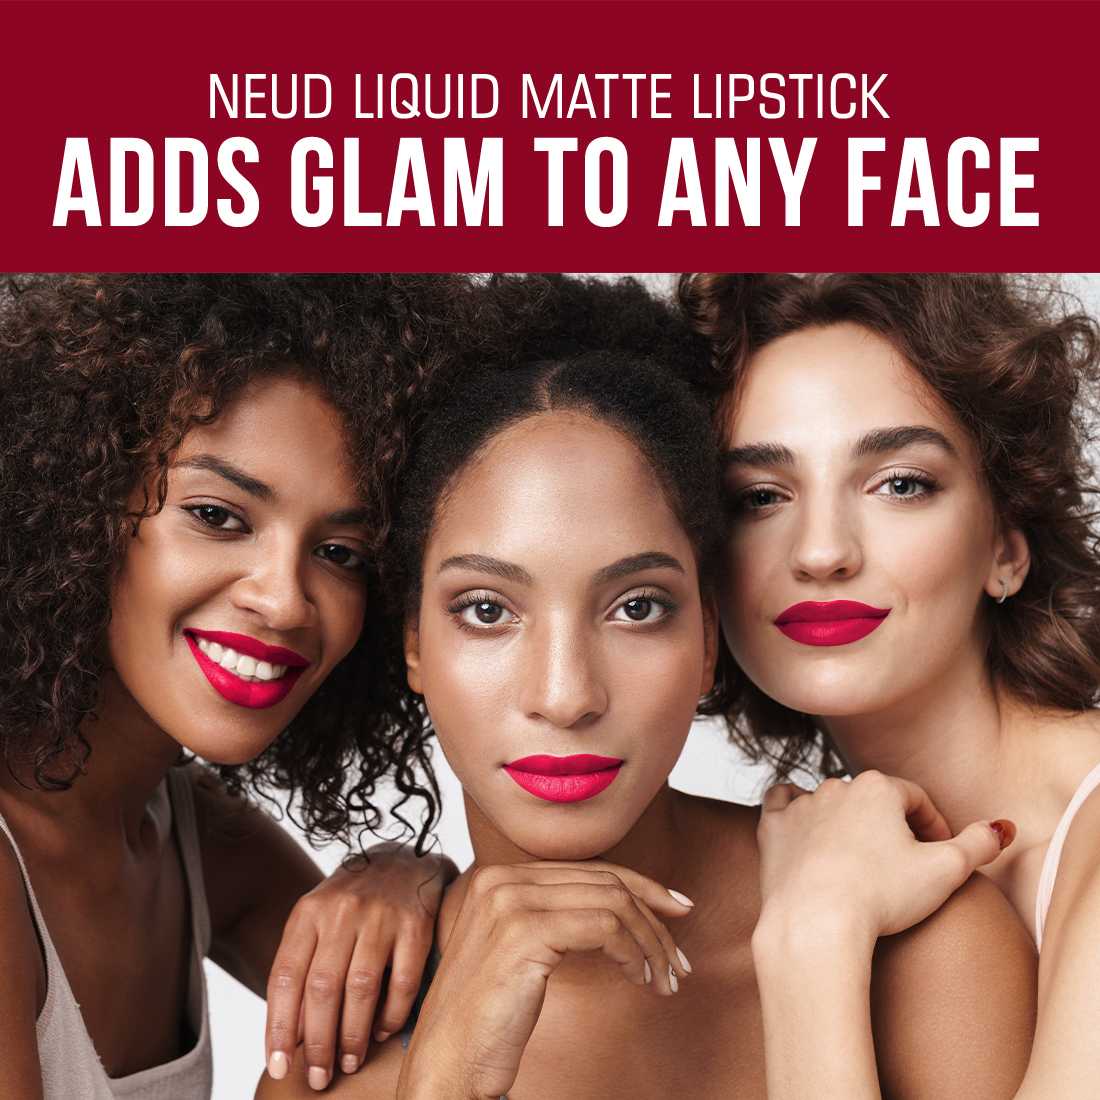 NEUD Matte Liquid Lipstick Peachy Pink with Jojoba Oil, Vitamin E and Almond Oil - Smudge Proof 12-hour Stay Formula with Free Lip Gloss